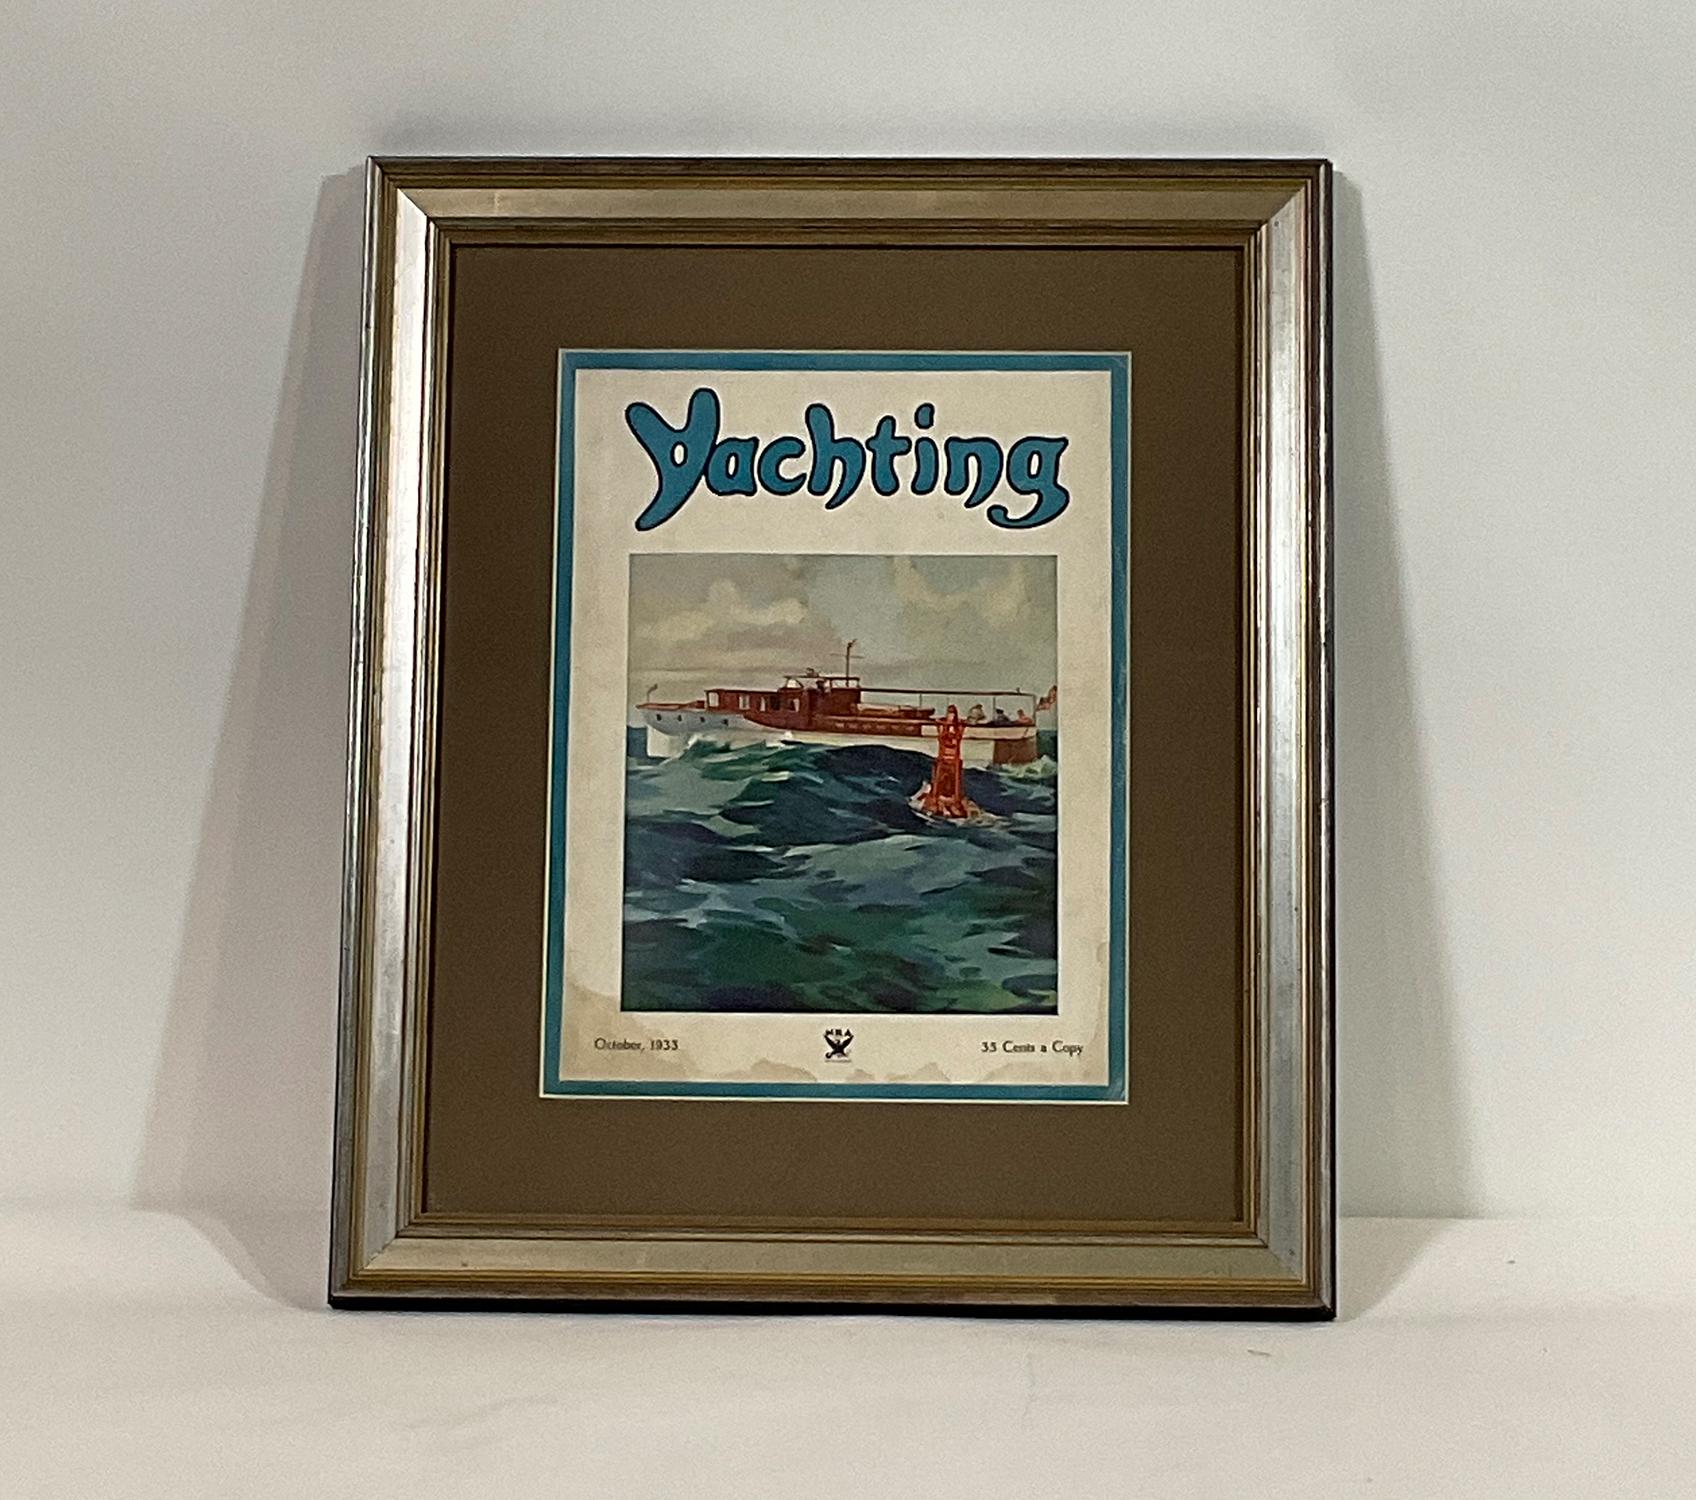 1933 yachting magazine cover showing a yacht passing a buoy. Dated October 1933. Matted and framed. Note staining.

Weight: 5 lbs.
Overall Dimensions: 18” H x 15” L
Made: America
Material: Paper
Date: 1933